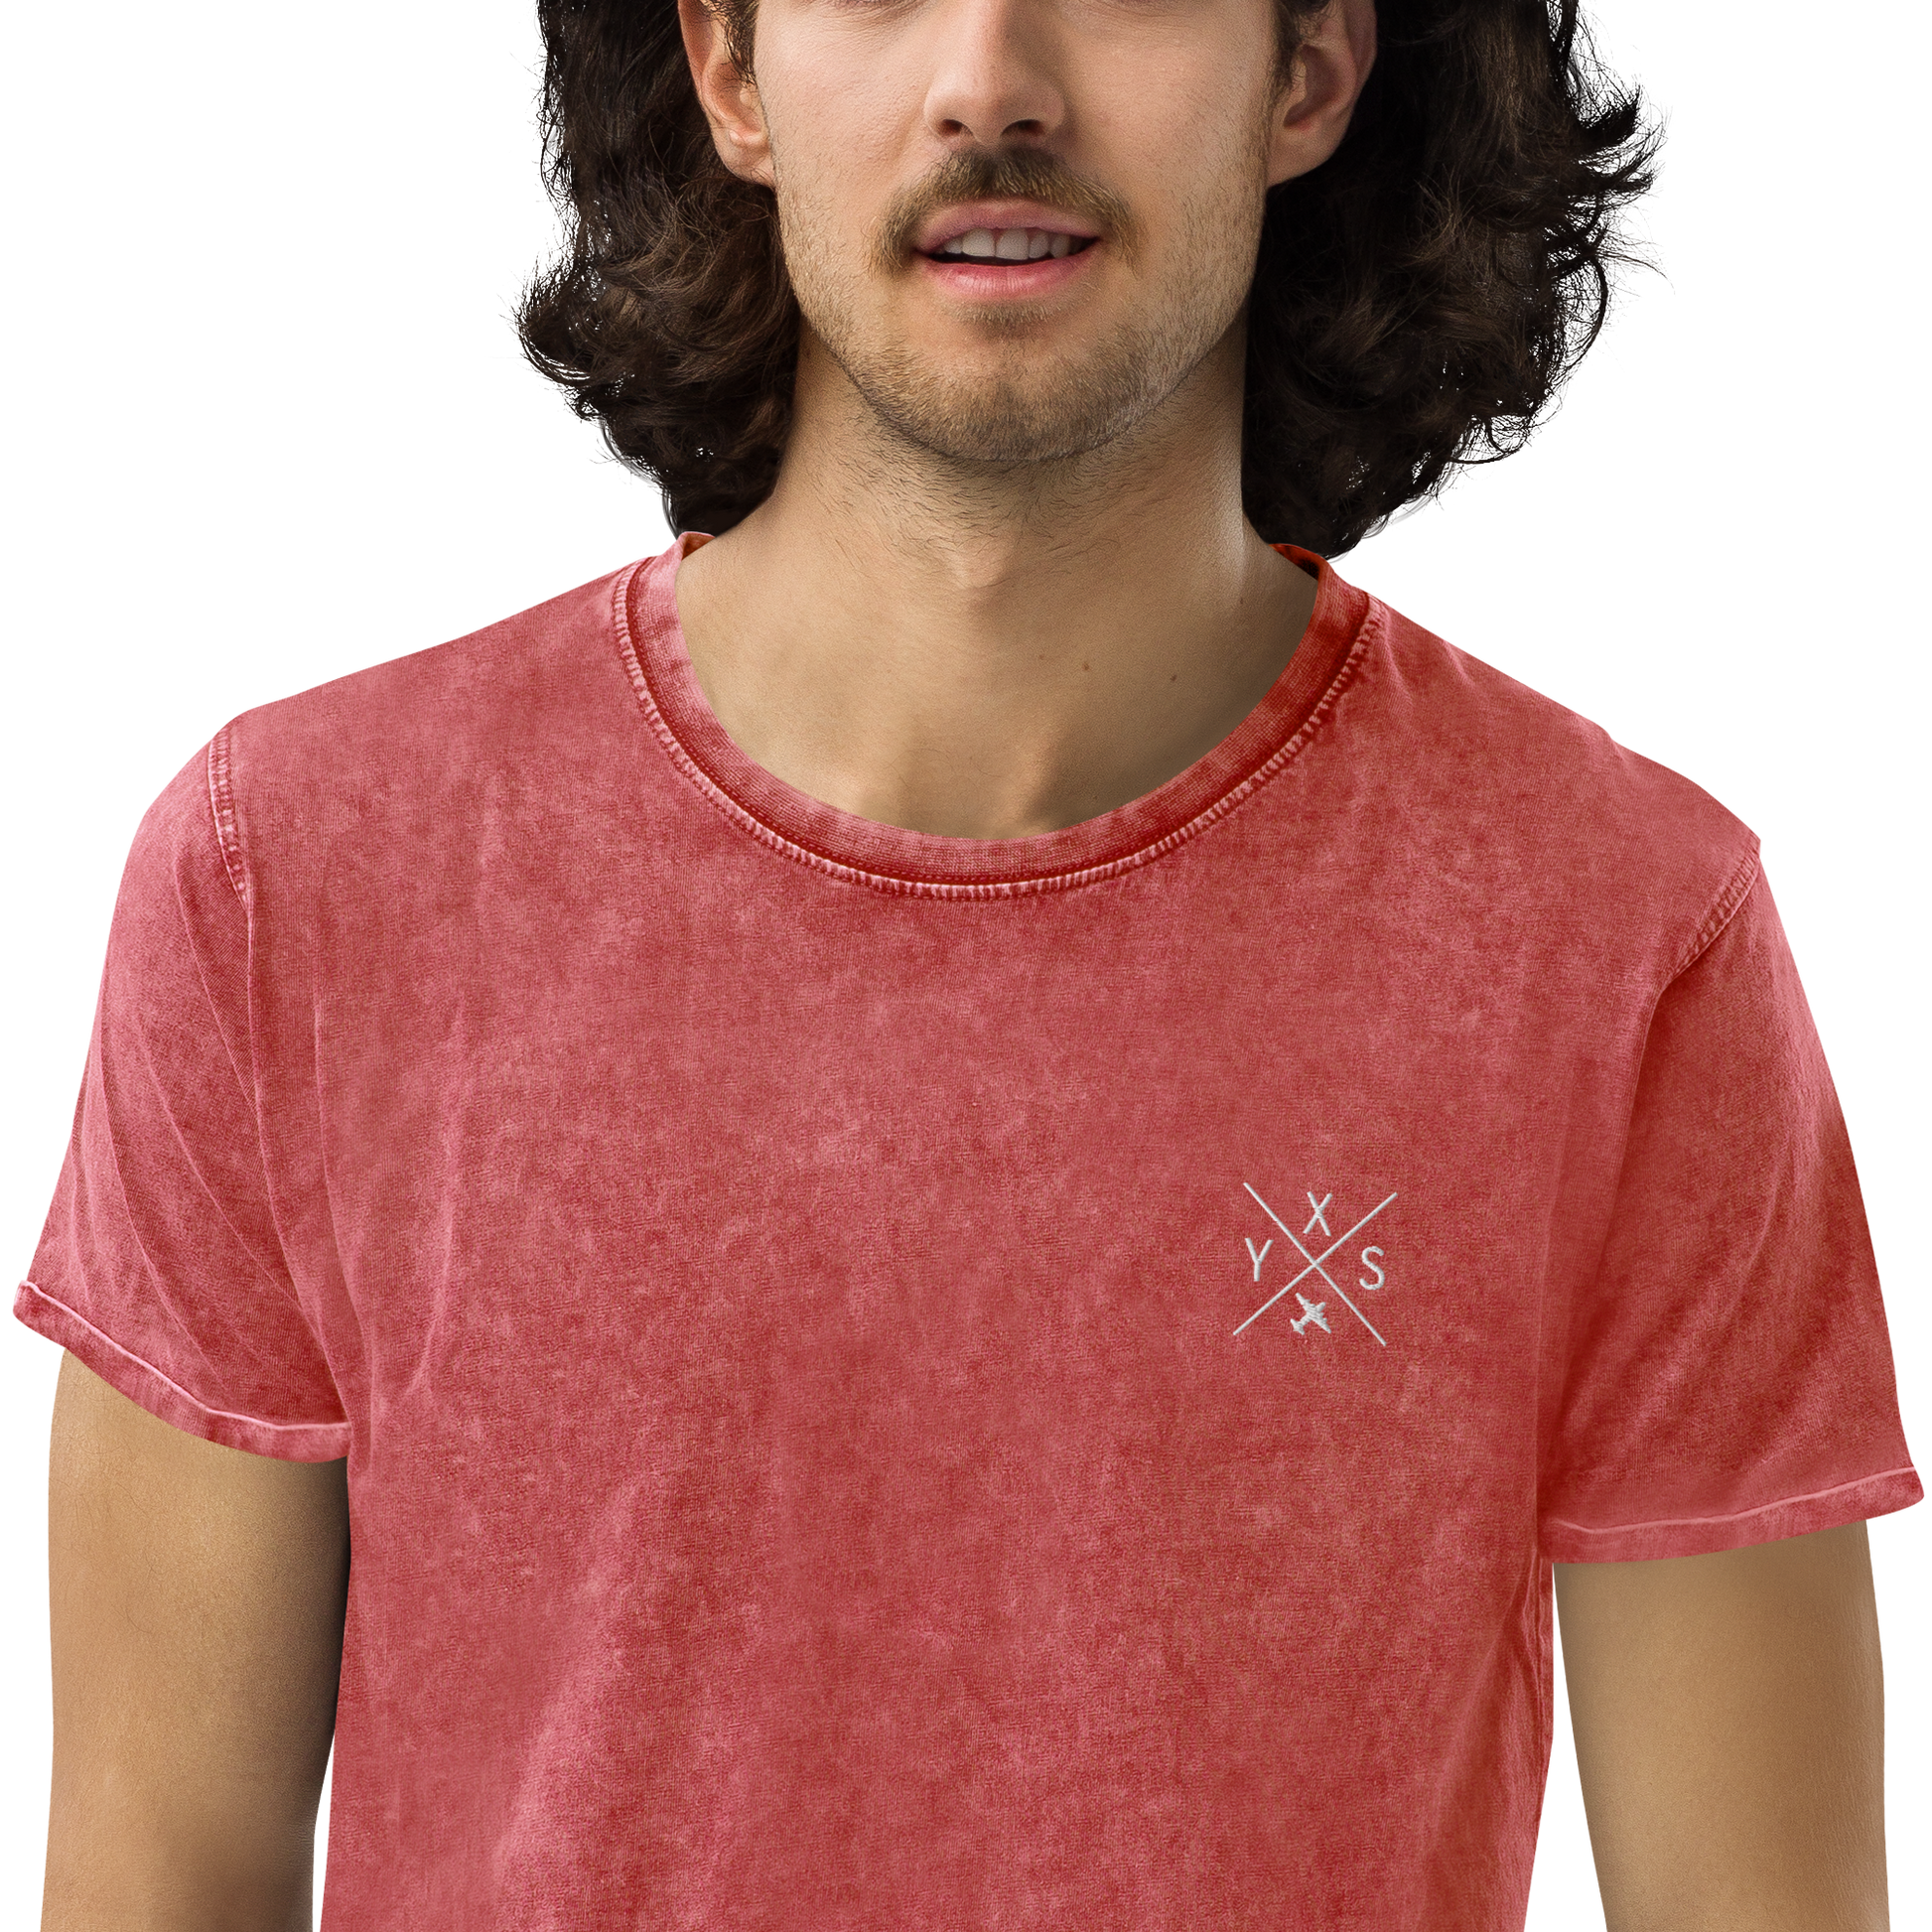 YHM Designs - YXS Prince George Denim T-Shirt - Crossed-X Design with Airport Code and Vintage Propliner - White Embroidery - Image 09